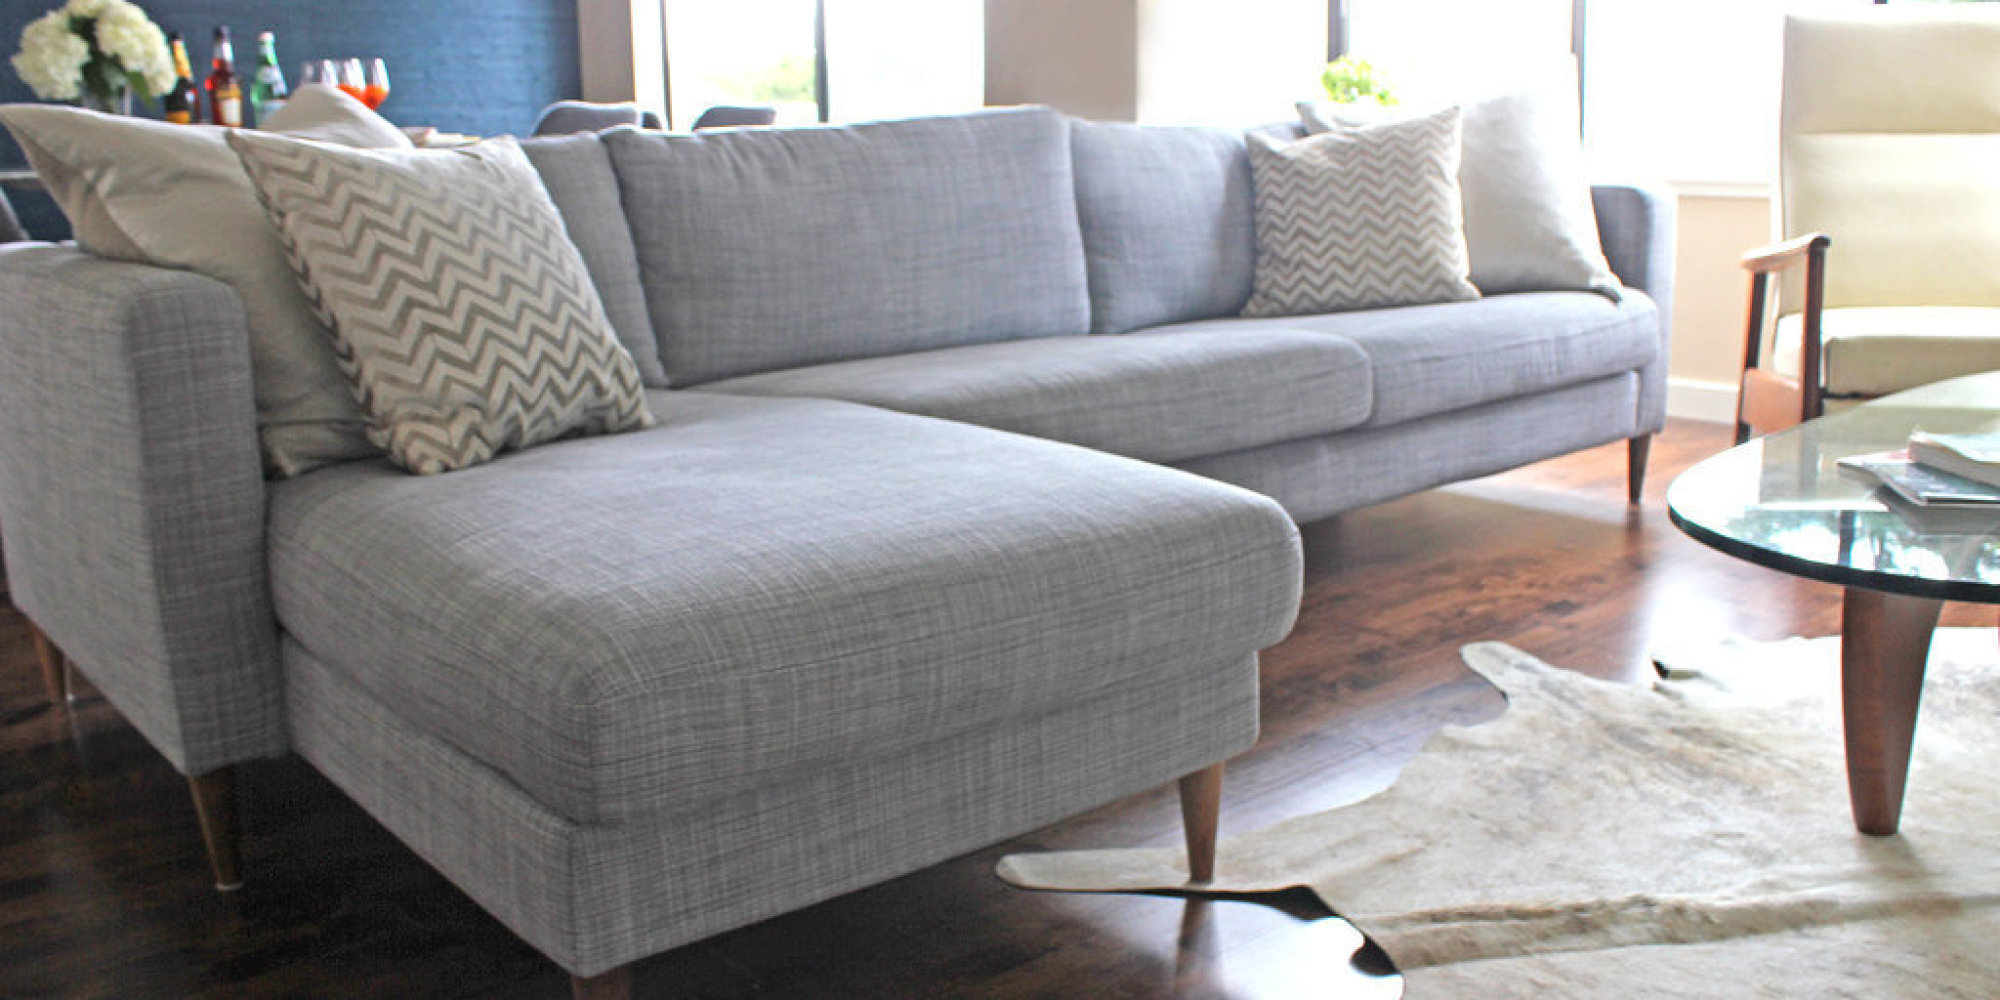 The Secret To Making An Ikea Couch Look Way More Expensive